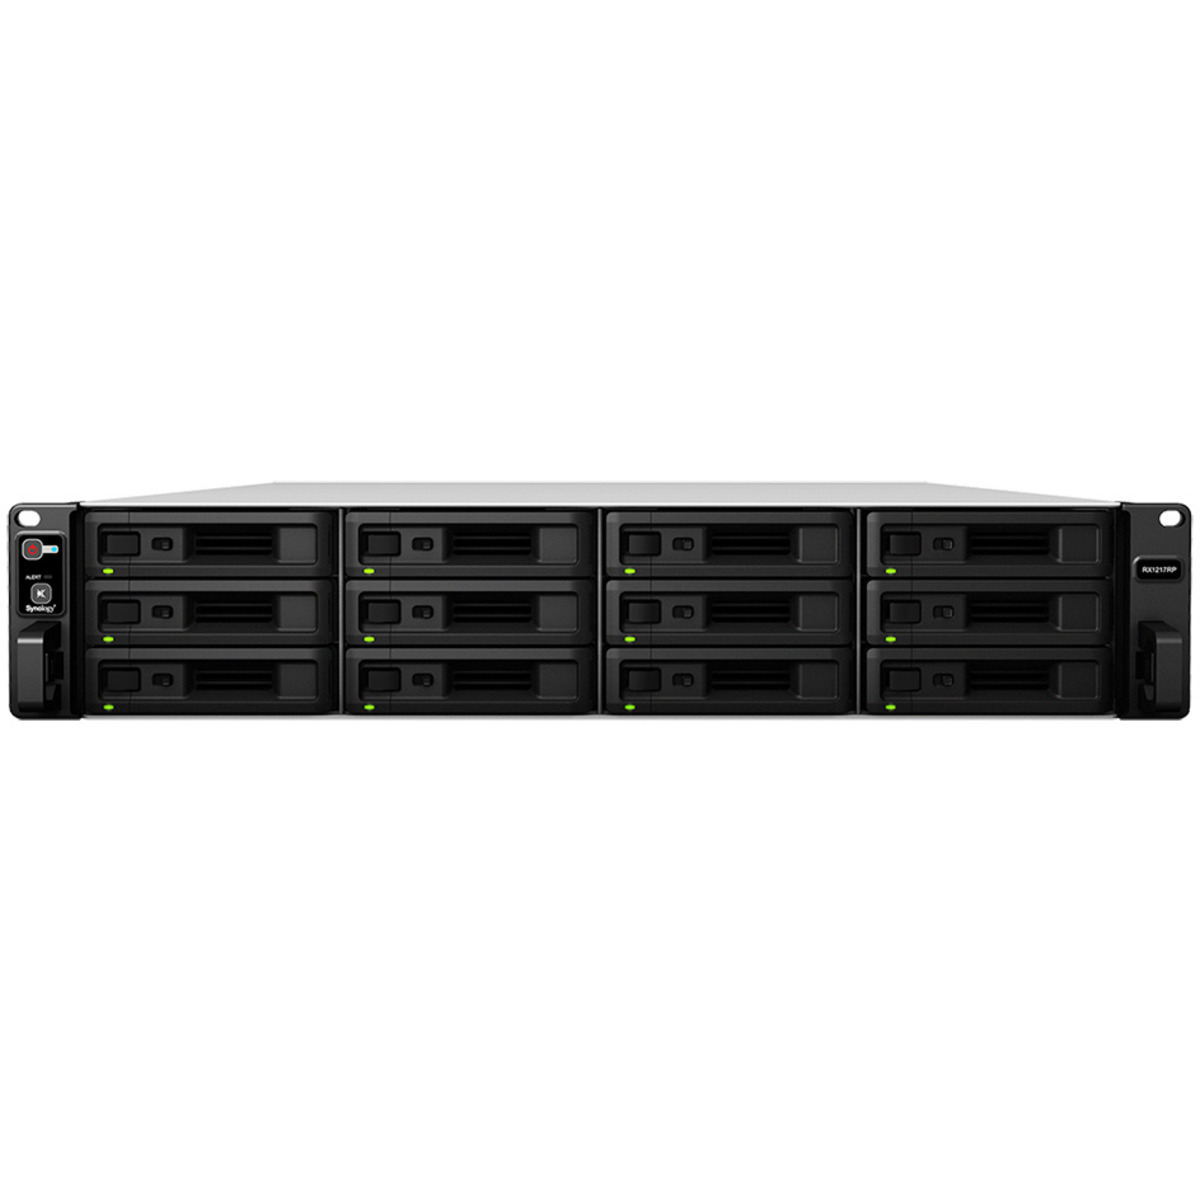 Synology RX1217 External Expansion Drive 32tb 12-Bay RackMount Large Business / Enterprise Expansion Enclosure 8x4tb Western Digital Red SA500 WDS400T1R0A 2.5 560/530MB/s SATA 6Gb/s SSD NAS Class Drives Installed - Burn-In Tested RX1217 External Expansion Drive